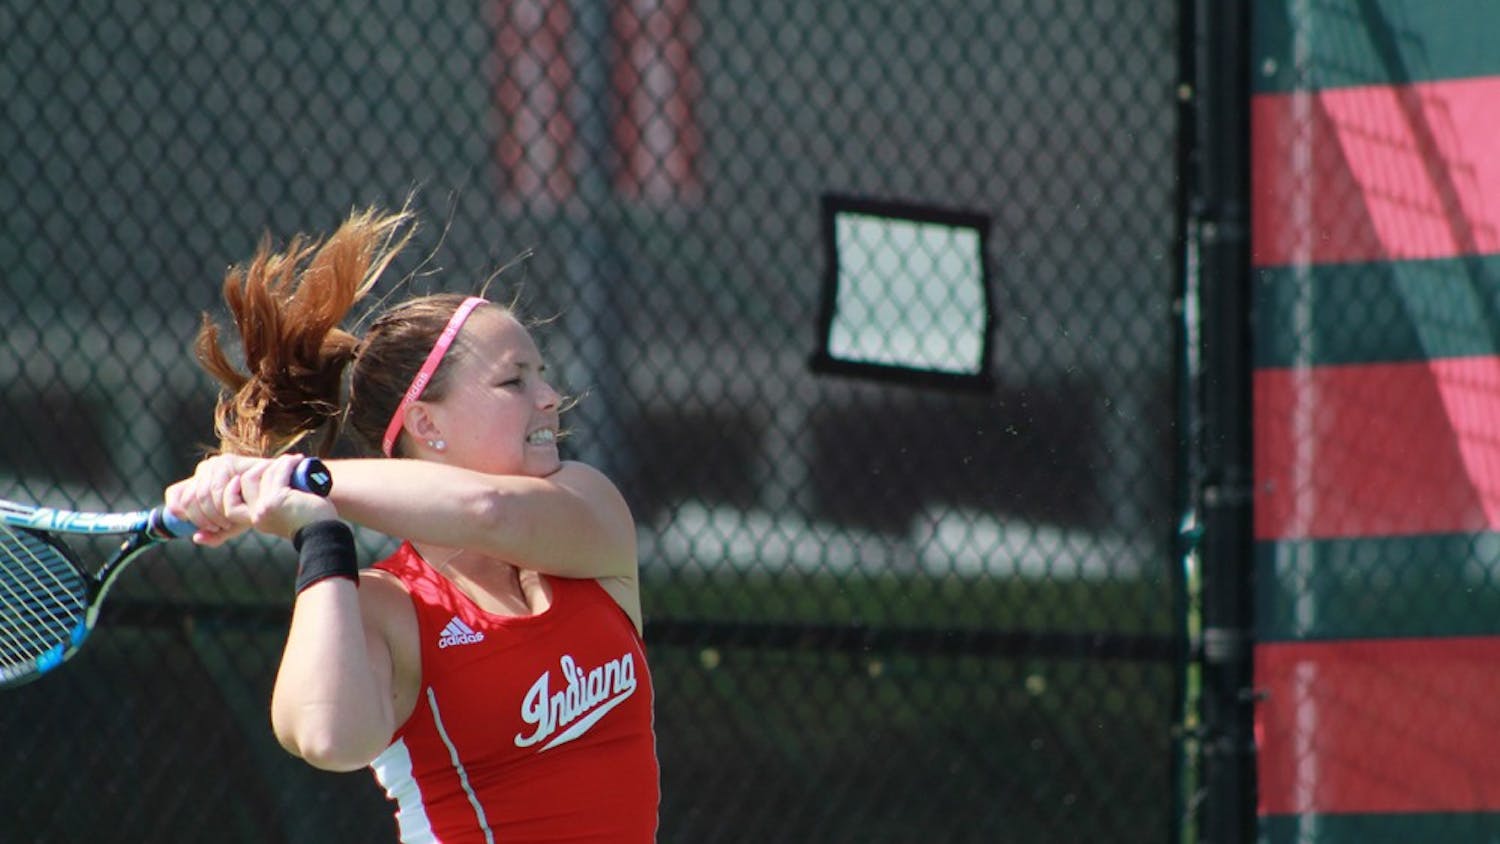 Graduate senior,&nbsp;Alicia Robinson hits the ball in a singles match Sunday morning. The Hoosiers took on the Wildcats in their final home match of the season.&nbsp;